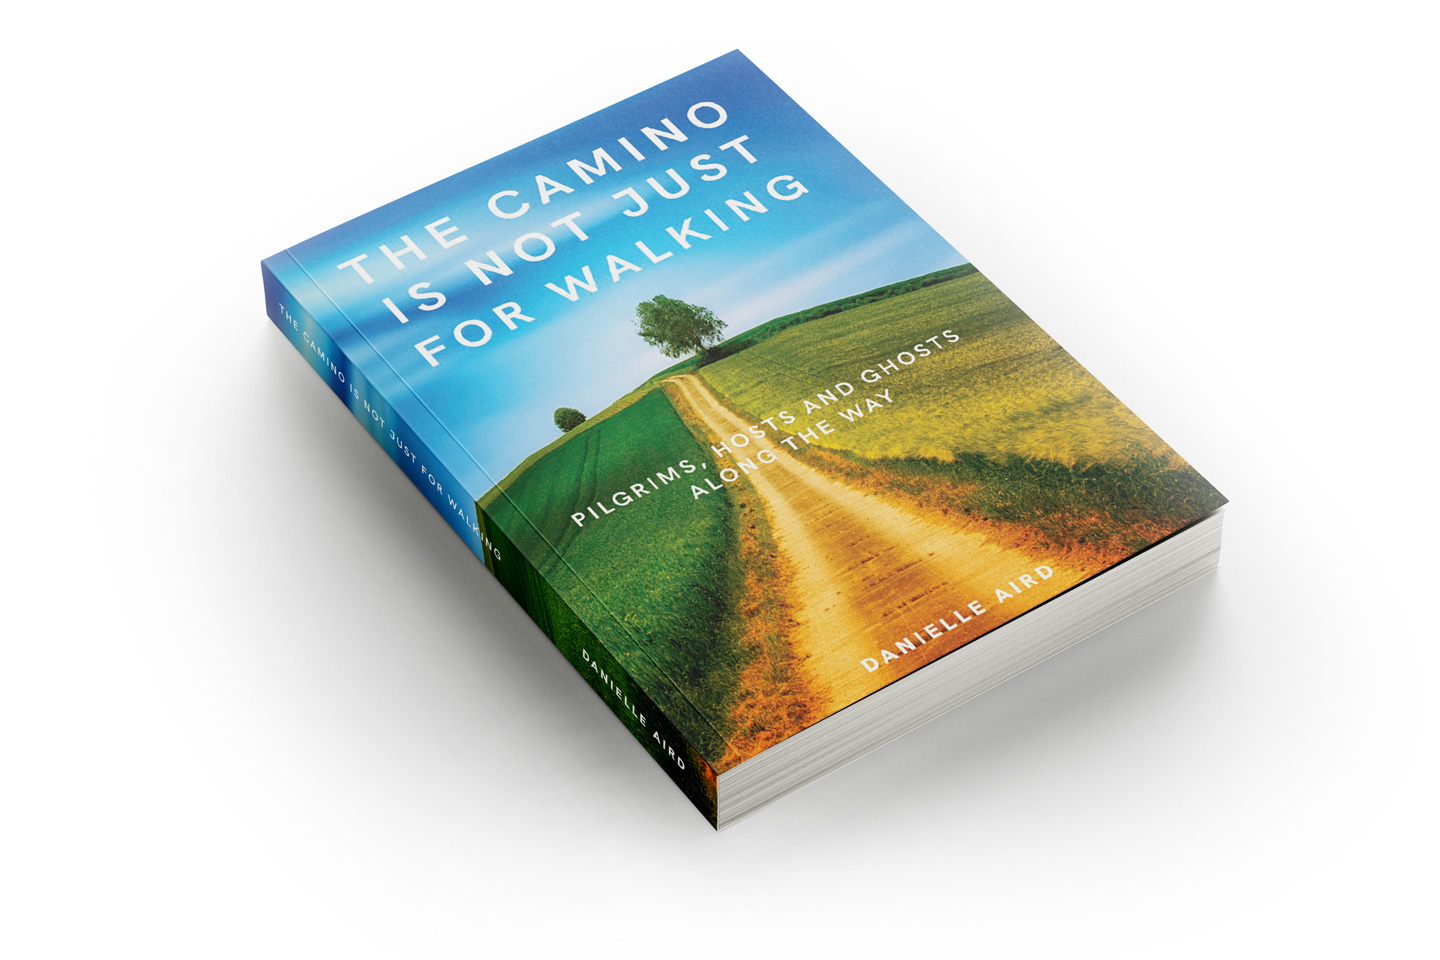 Mockup of The Camino is not just for walking by Danielle Aird